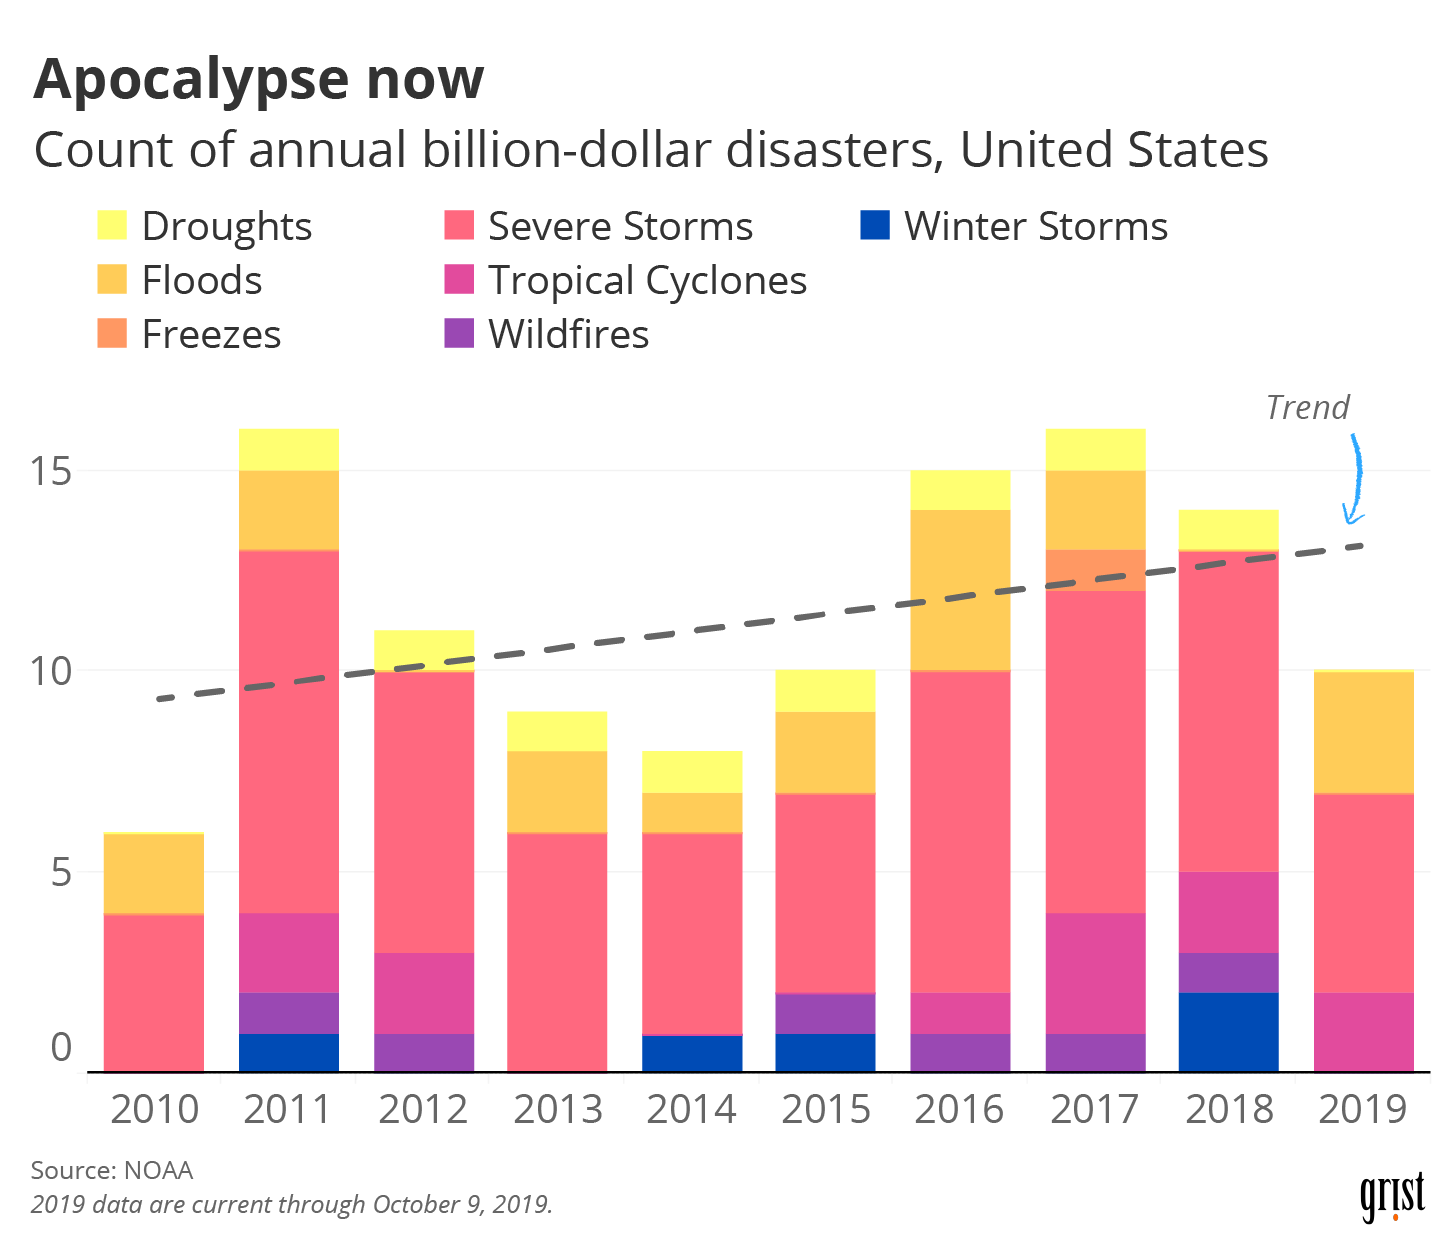 A bar chart showing an increasing frequency of billion-dollar disasters between 2010 and 2019